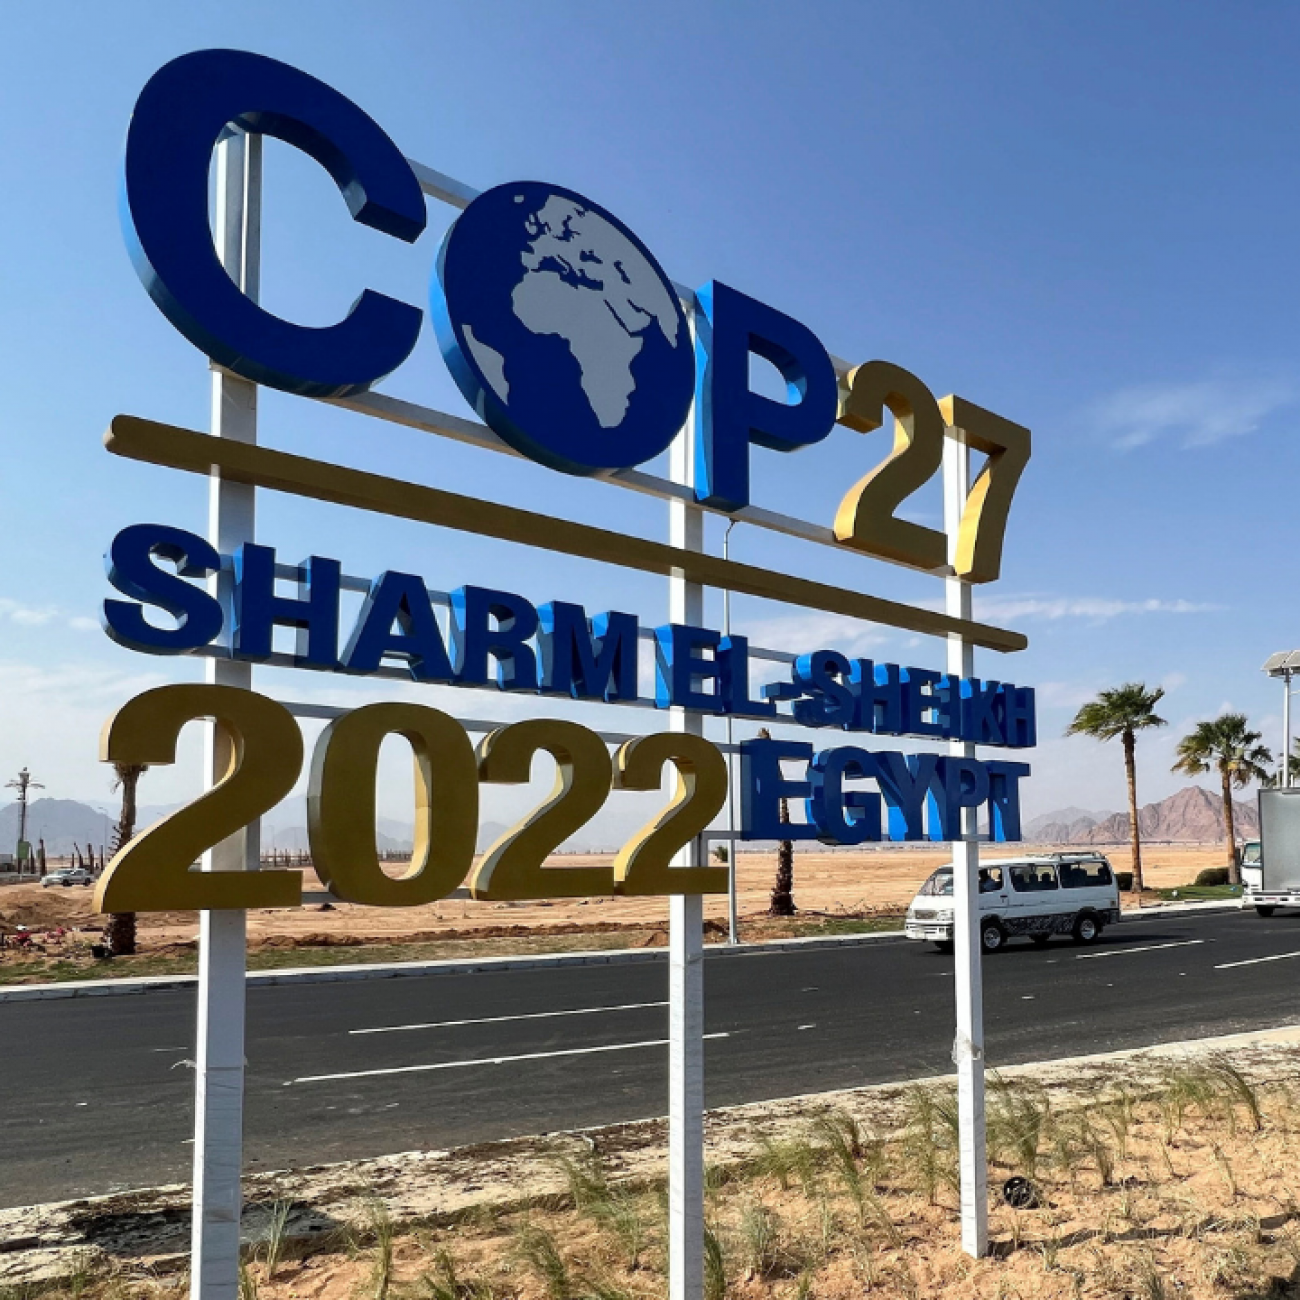 View of a COP27 sign on the road leading to the conference area in Egypt's Red Sea resort town of Sharm el-Sheikh as the city prepares to host the COP27 climate summit, in Sharm el-Sheikh, Egypt, on October 20, 2022. 